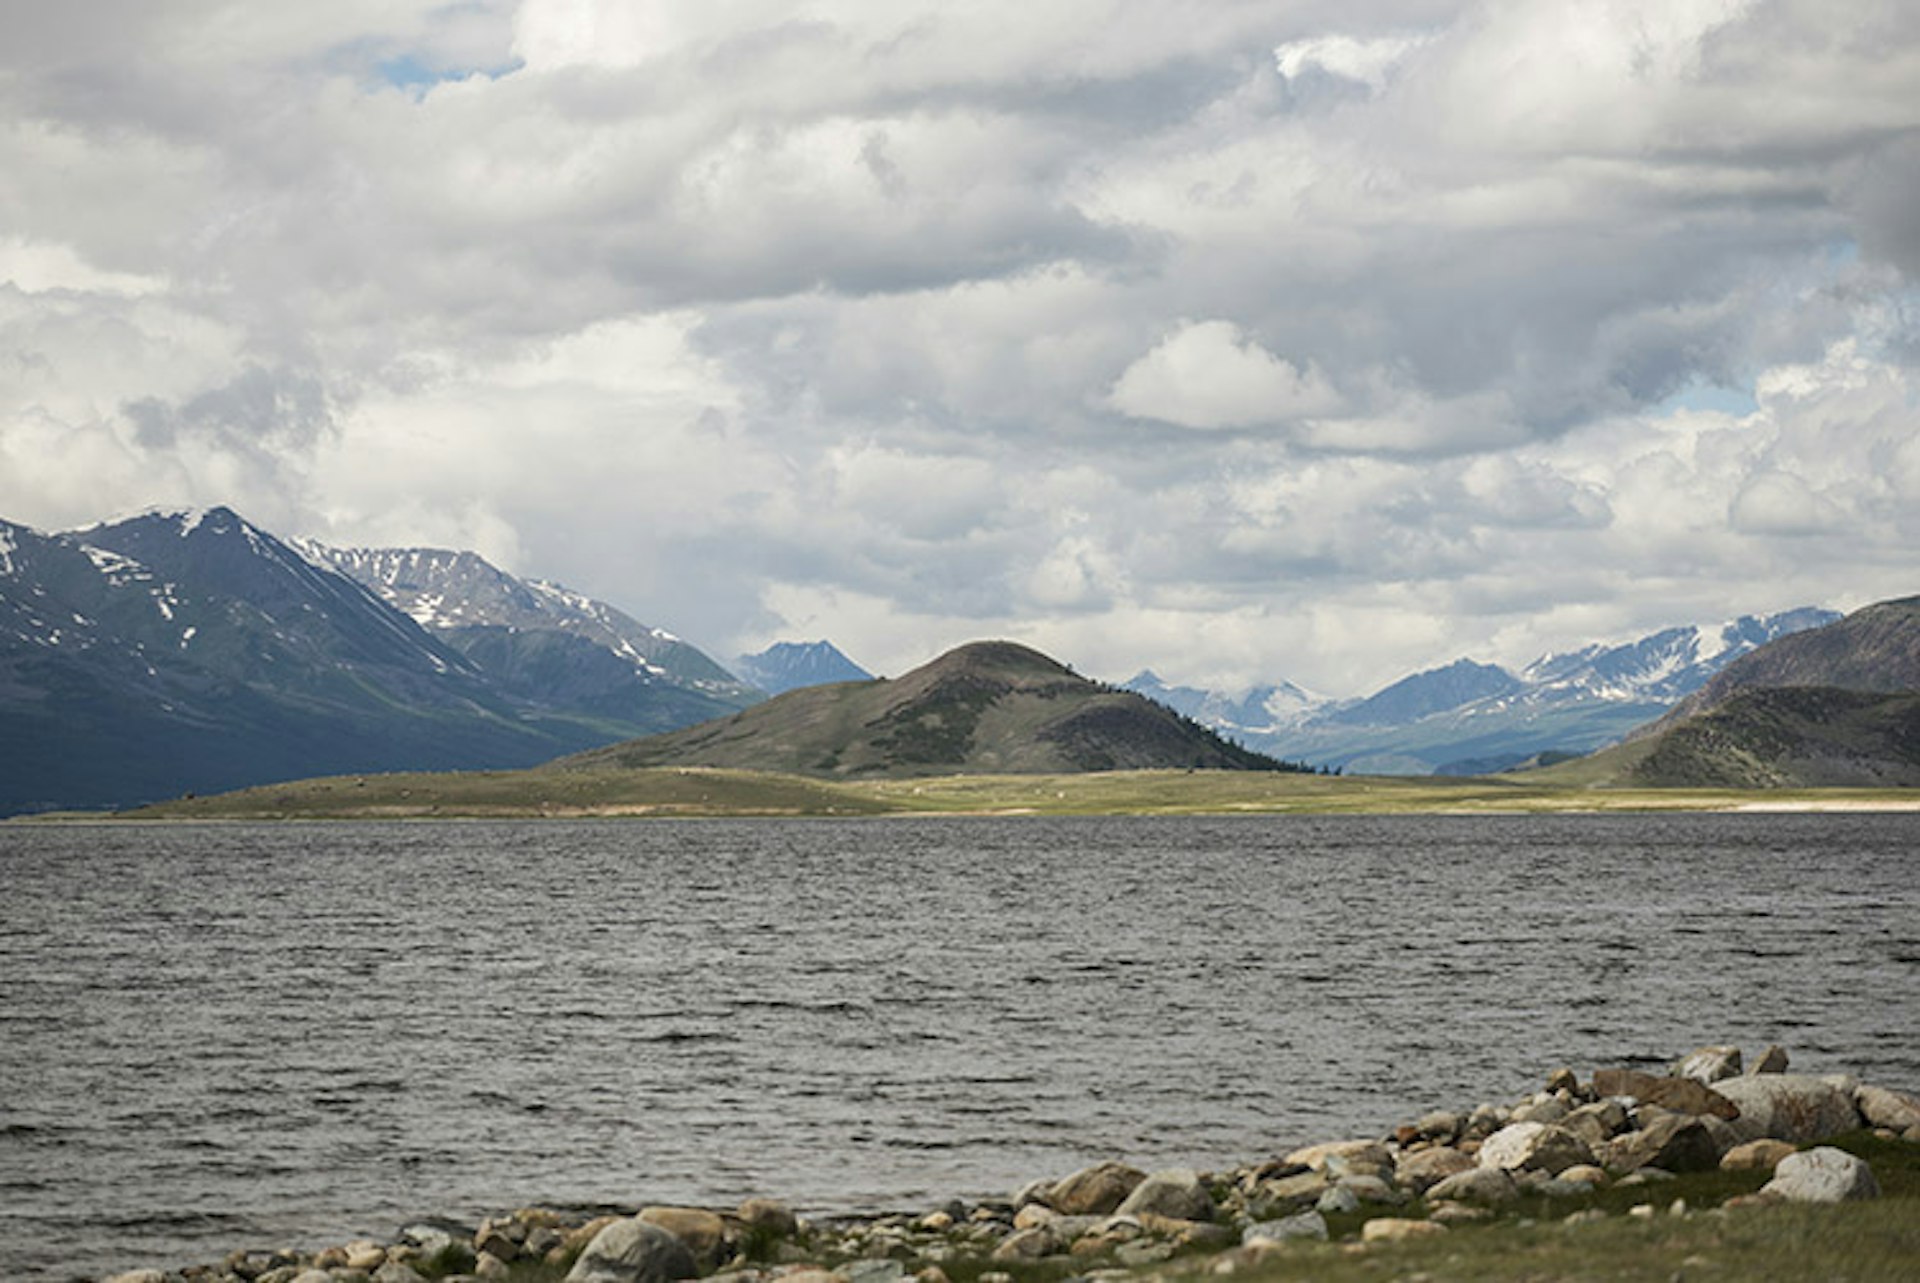 Khoton Lake sits at 2000 metres in altitude. Image by David Baxendale / Lonely Planet